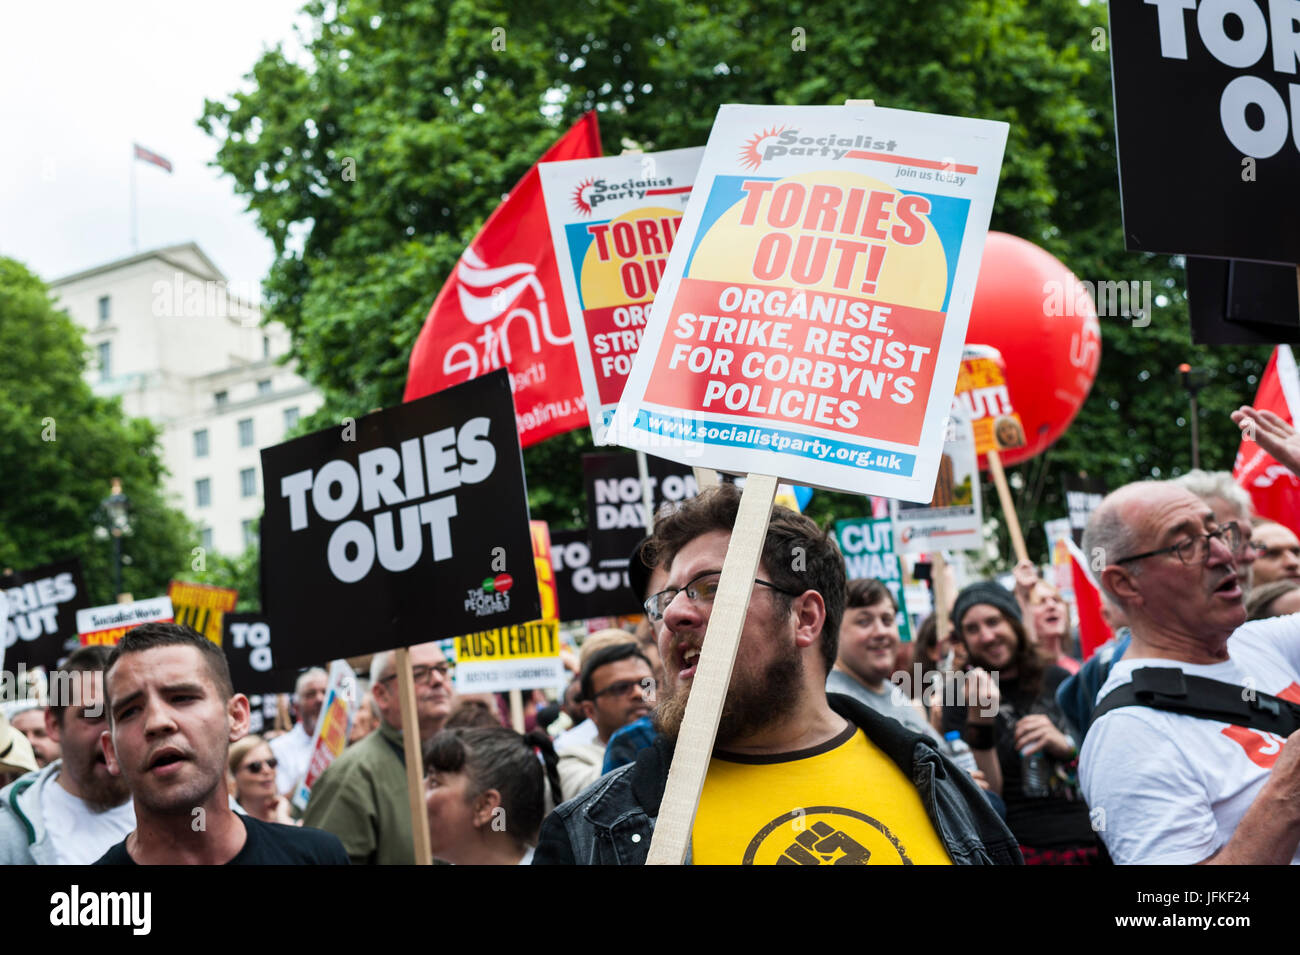 London, UK. 01st July, 2017. Demonstrators carry placards during the 'Not One Day More' march past Piccadilly Circus on July 1, 2017 in London, England. Thousands of protesters joined the anti-Tory demonstration at BBC Broadcasting House and marched to Parliament Square. The demonstrators were calling for an end to the Conservative Government and policies of austerity Credit: onebluelight.com/Alamy Live News Credit: onebluelight.com/Alamy Live News Stock Photo